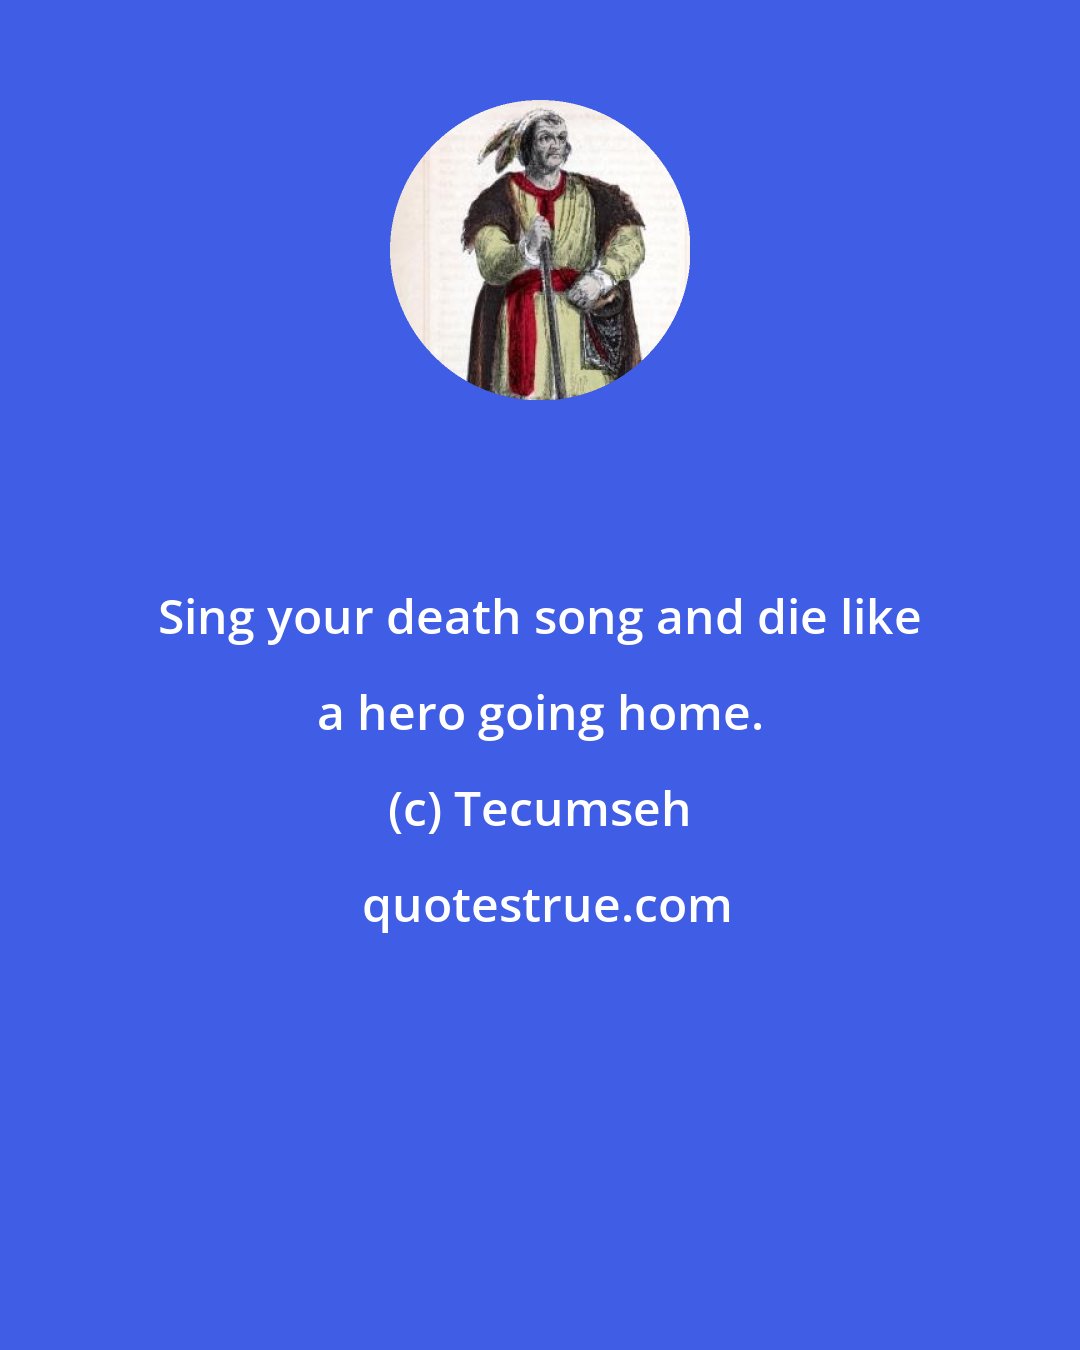 Tecumseh: Sing your death song and die like a hero going home.